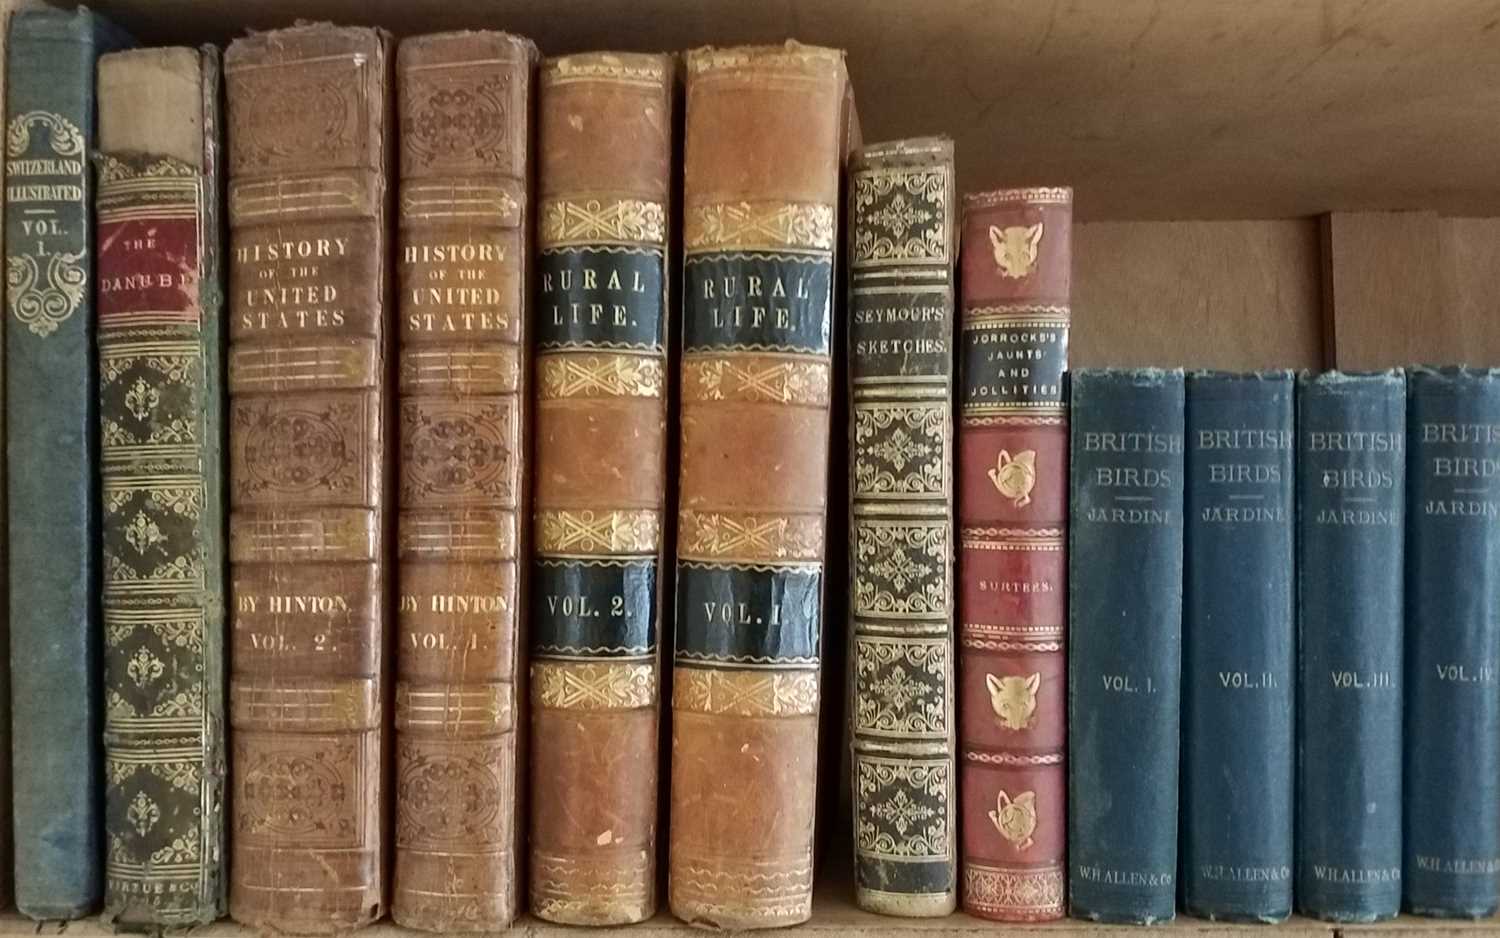 Lot 2 - Beattie (William). Switzerland Illustrated, 1835, and others